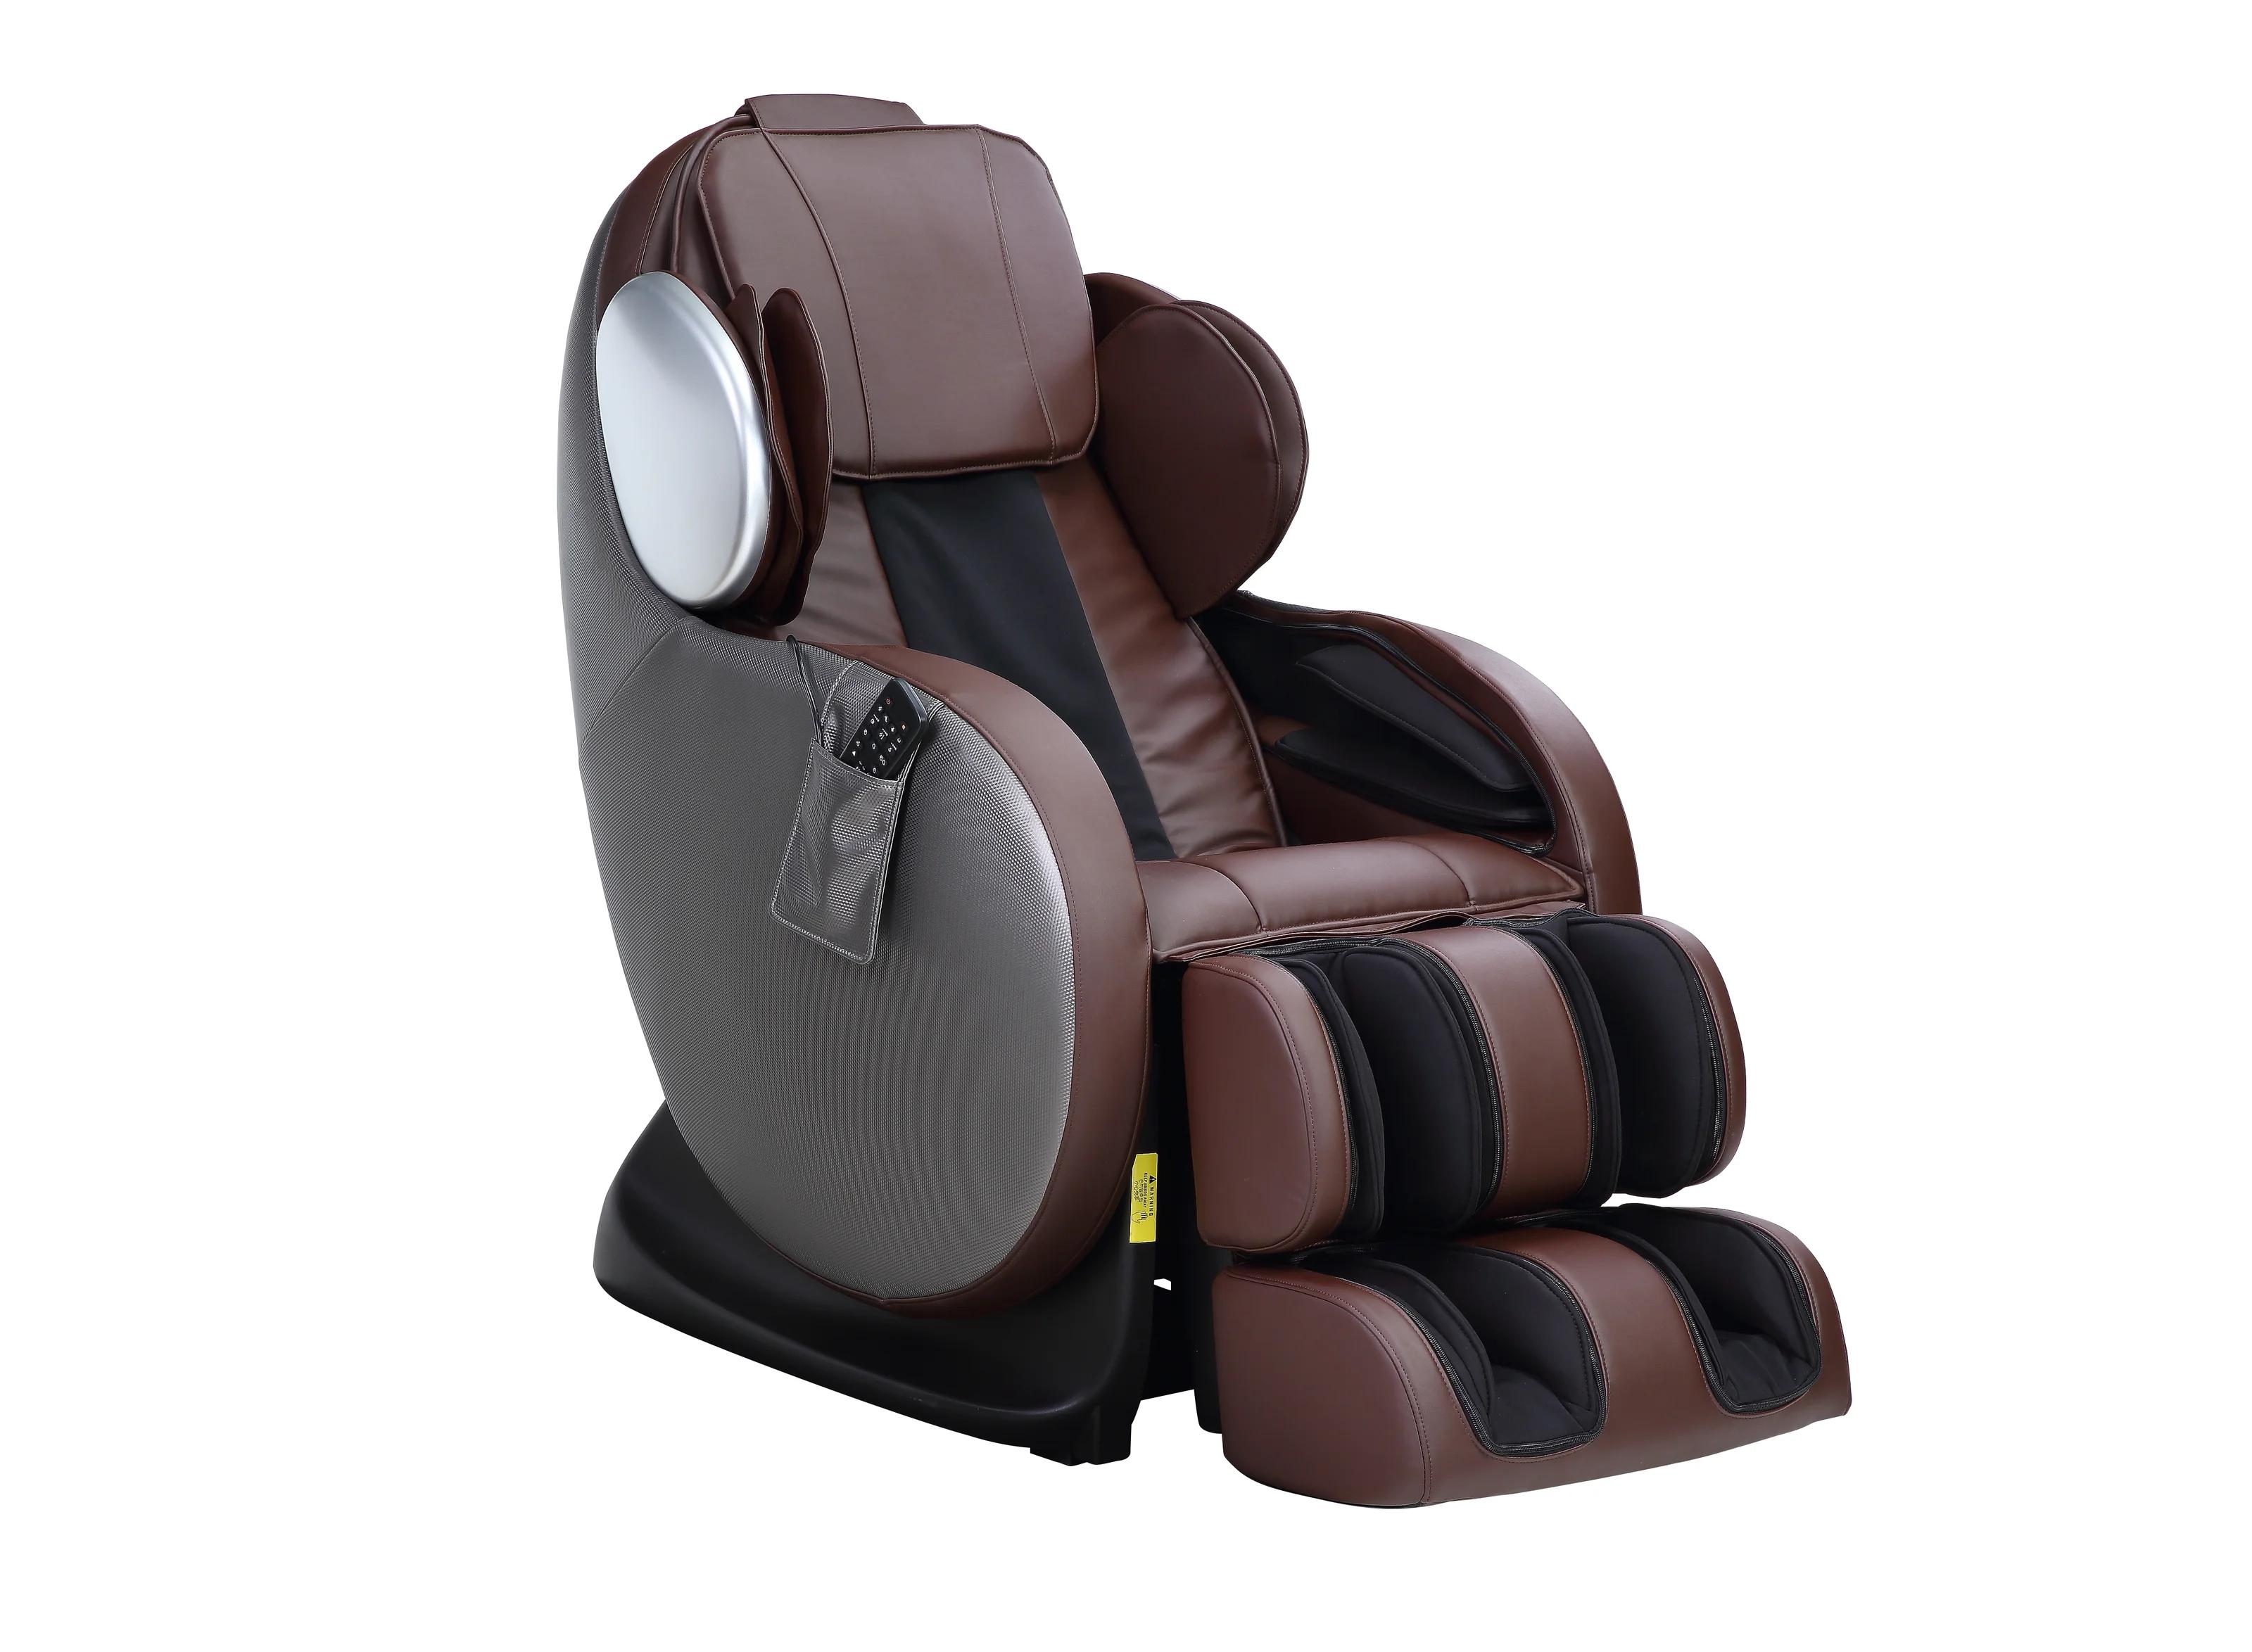 Modern Massage Chair Pacari LV00569 in Chocolate Faux Leather